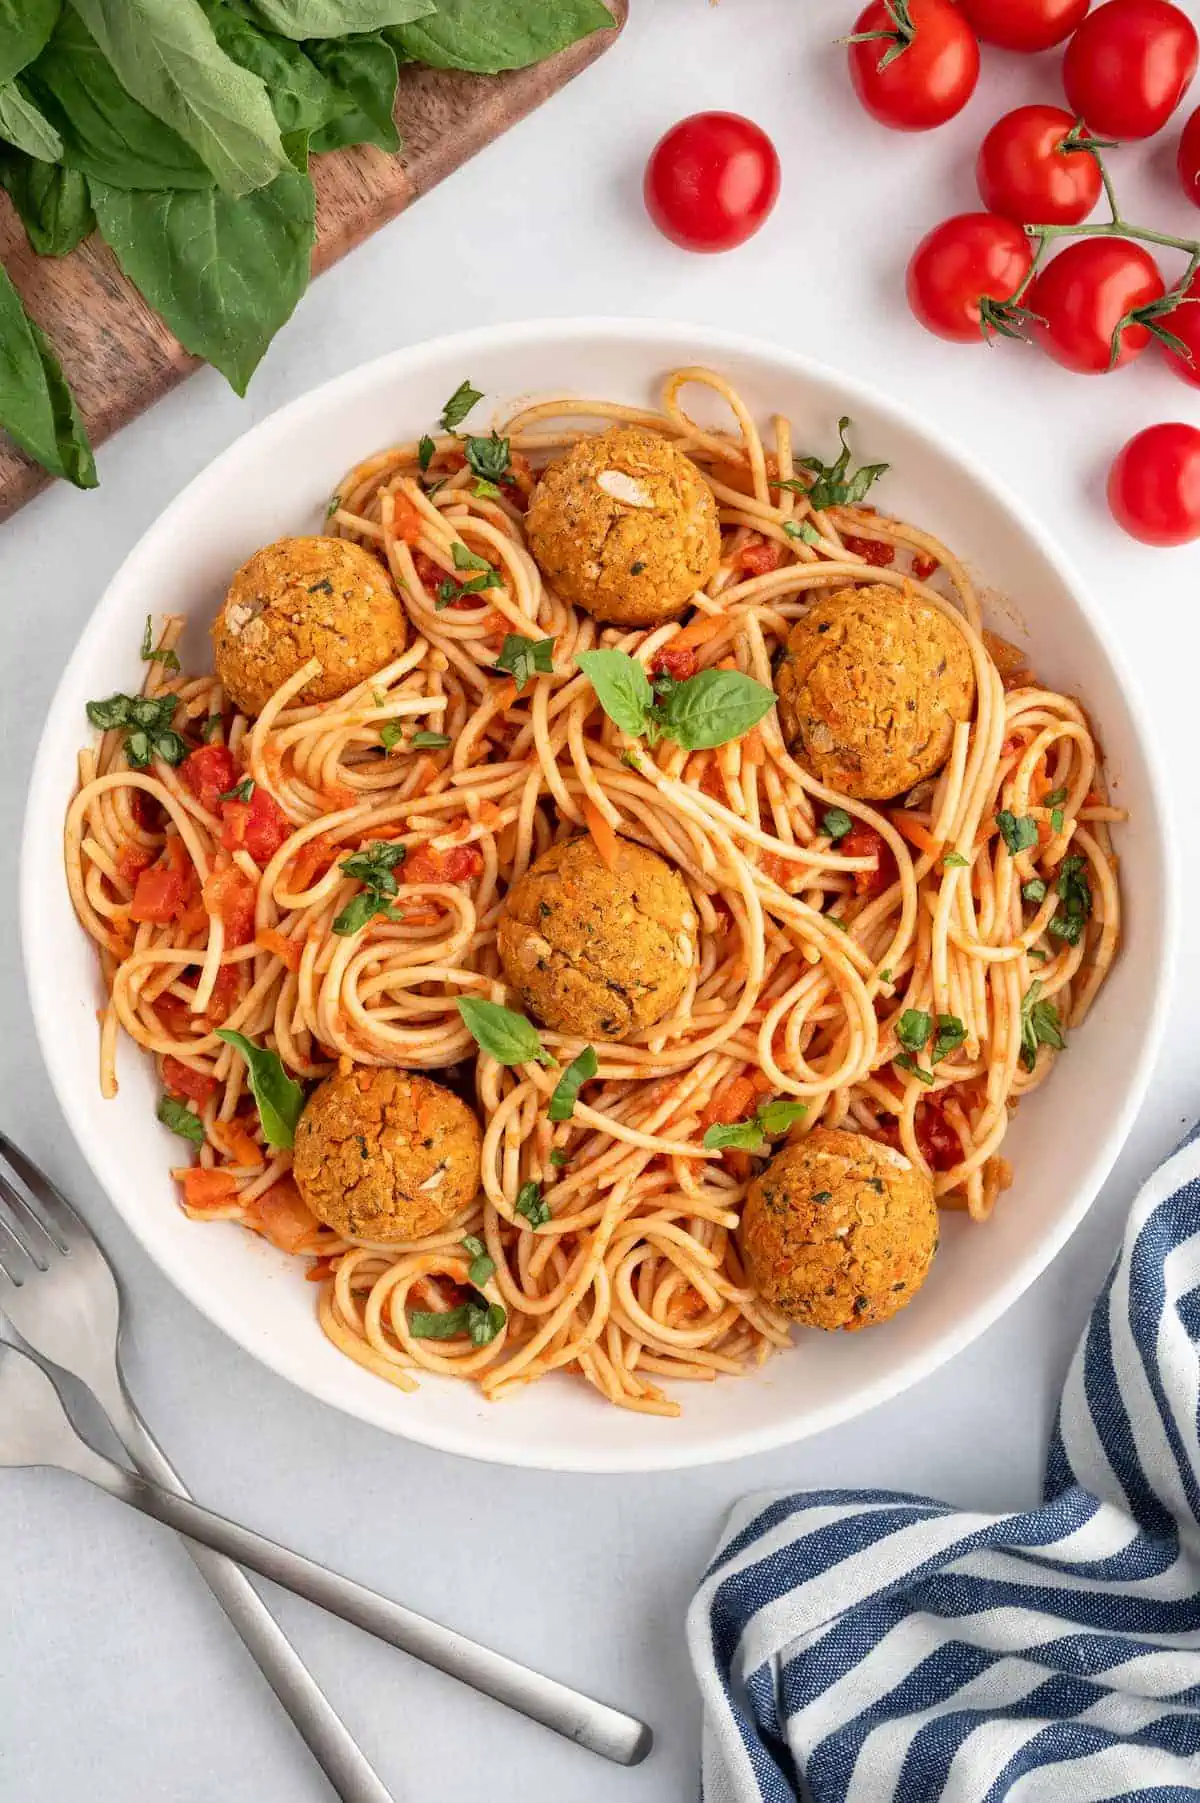 A bowl of pasta with sauce, veggie meatballs, and basil garnish.